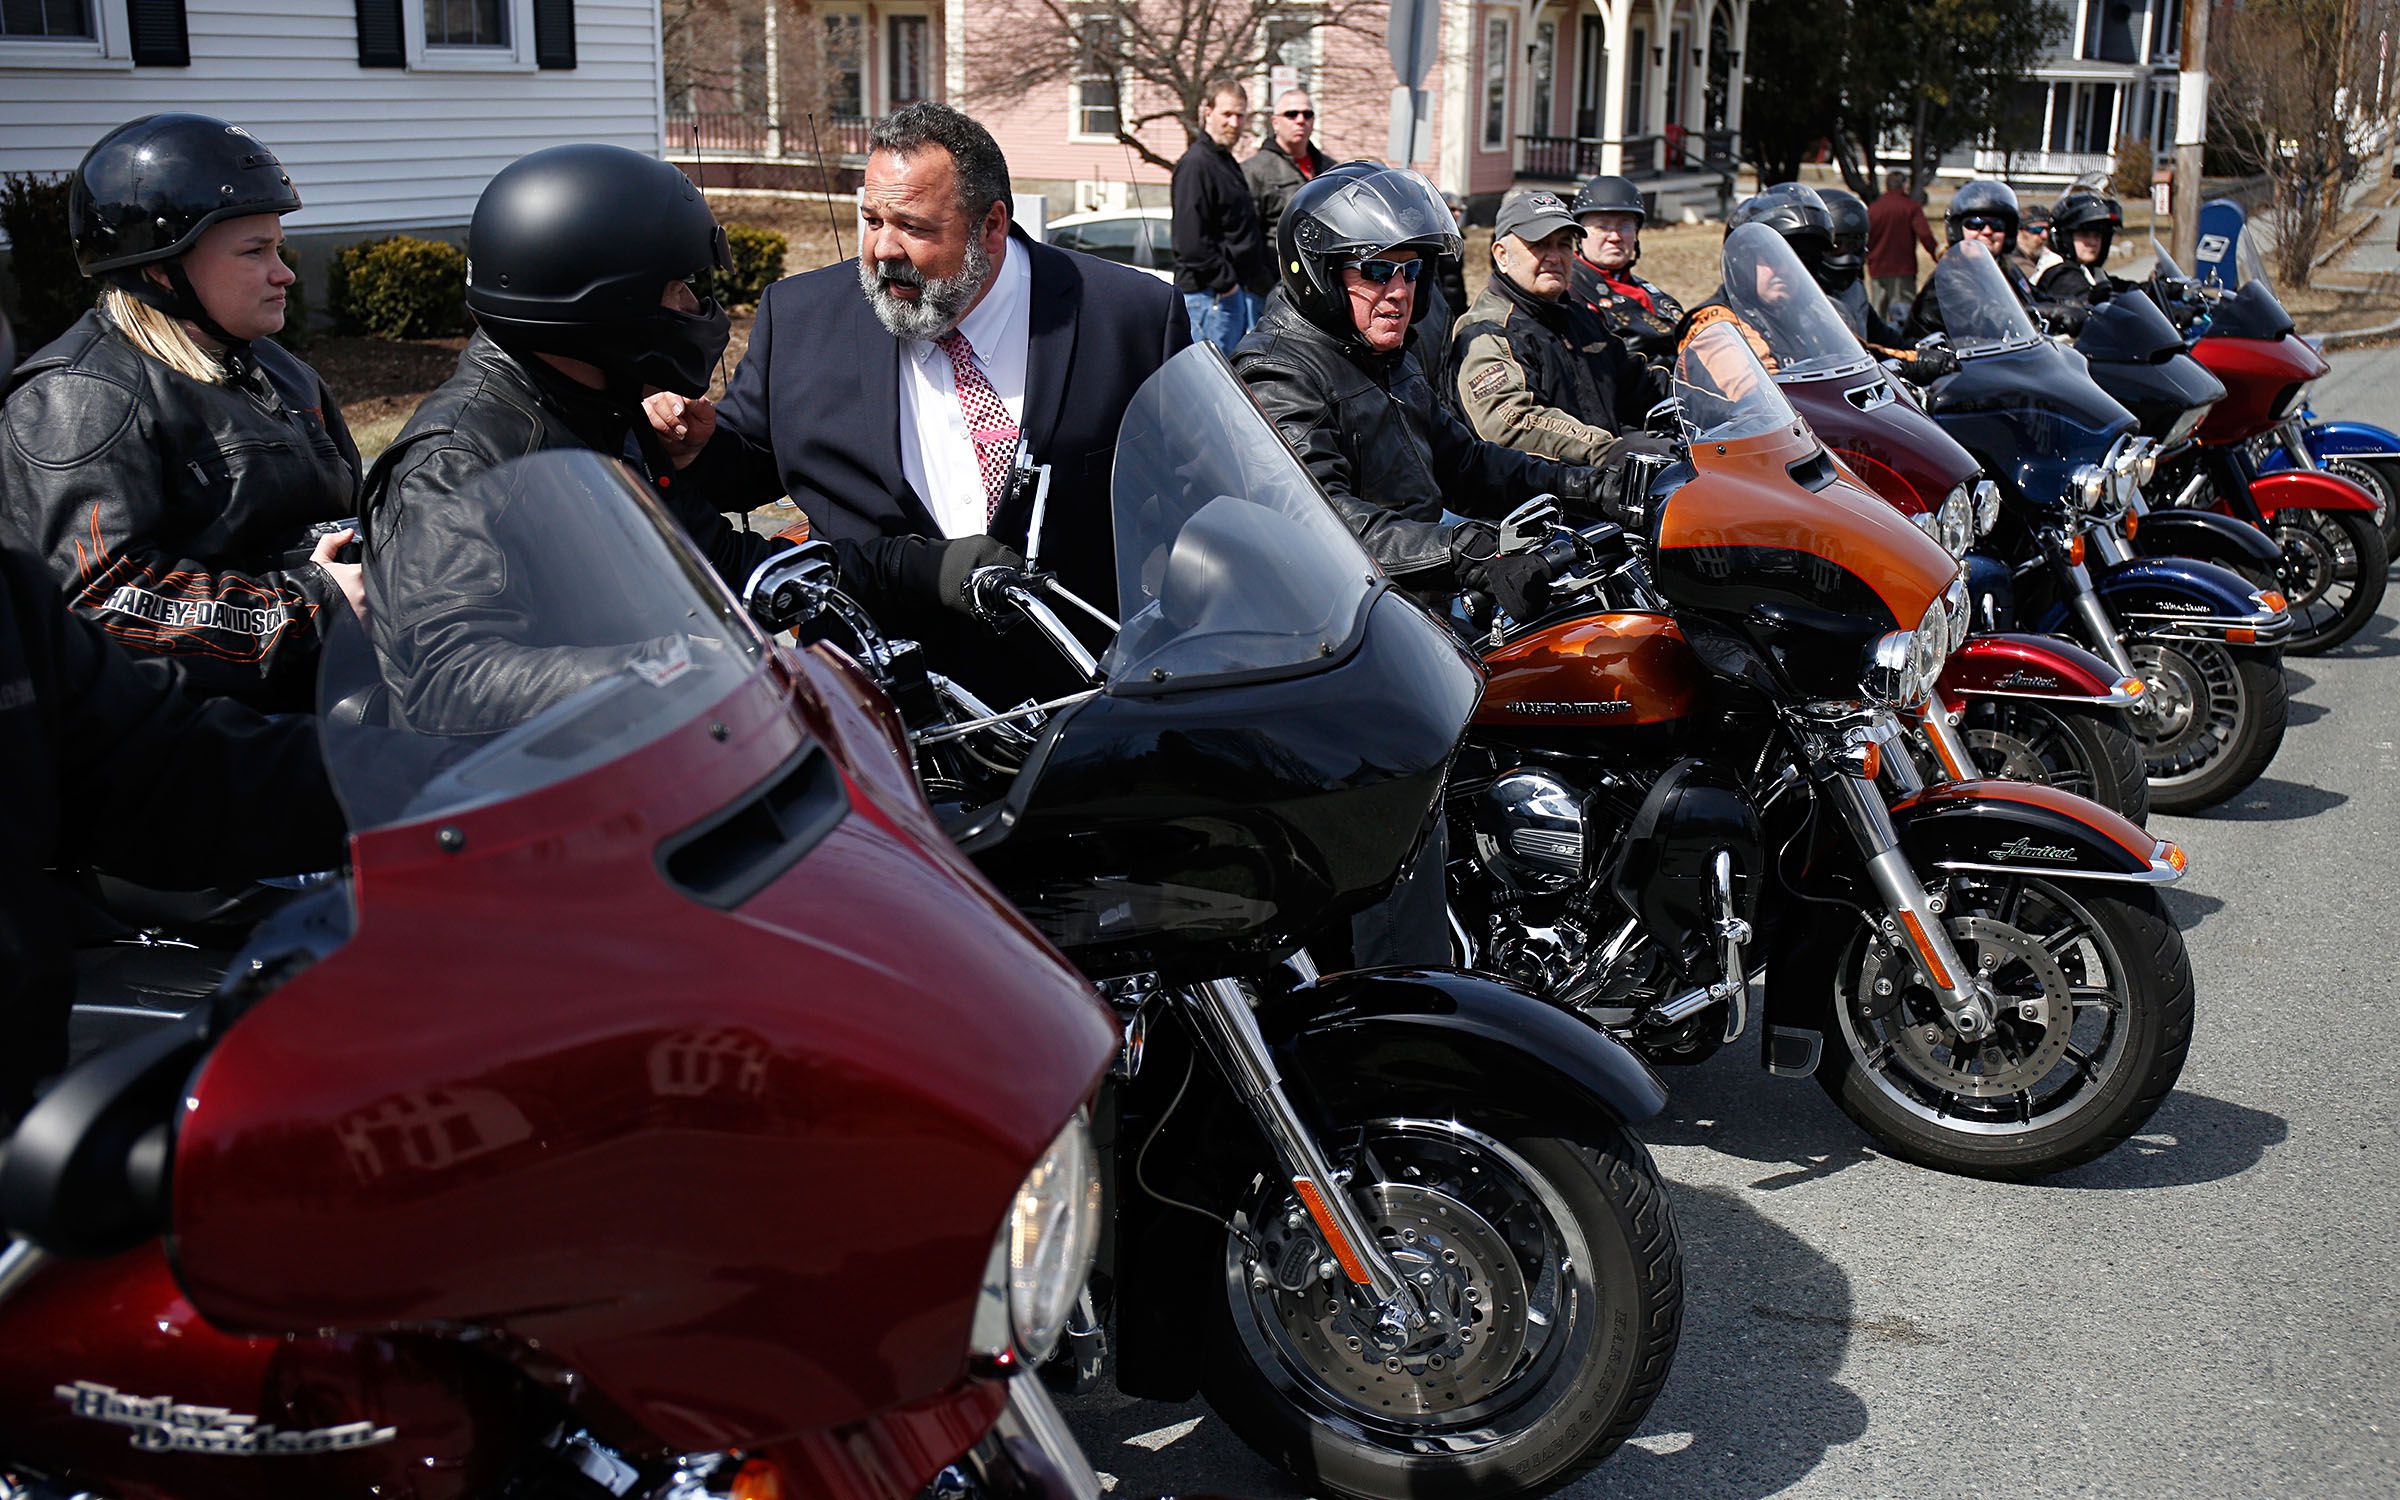 After handing off the urn with Fay "Woody" Woodward's remains, Ricker Funeral Home owner David Ahern speaks with Woodward's granddaughter Ashlee Delisle, of Plainfield, N.H., and brother-in-law John Andress, also of Plainfield, who are riding to the cemetery with fellow members of the Upper Valley chapter of the Harley Owners Group. Woodward was a life-long motorcycle enthusiast. "He was able to ride up to the very end," said a family member during his service. (Valley News - Geoff Hansen) Copyright Valley News. May not be reprinted or used online without permission. Send requests to permission@vnews.com.